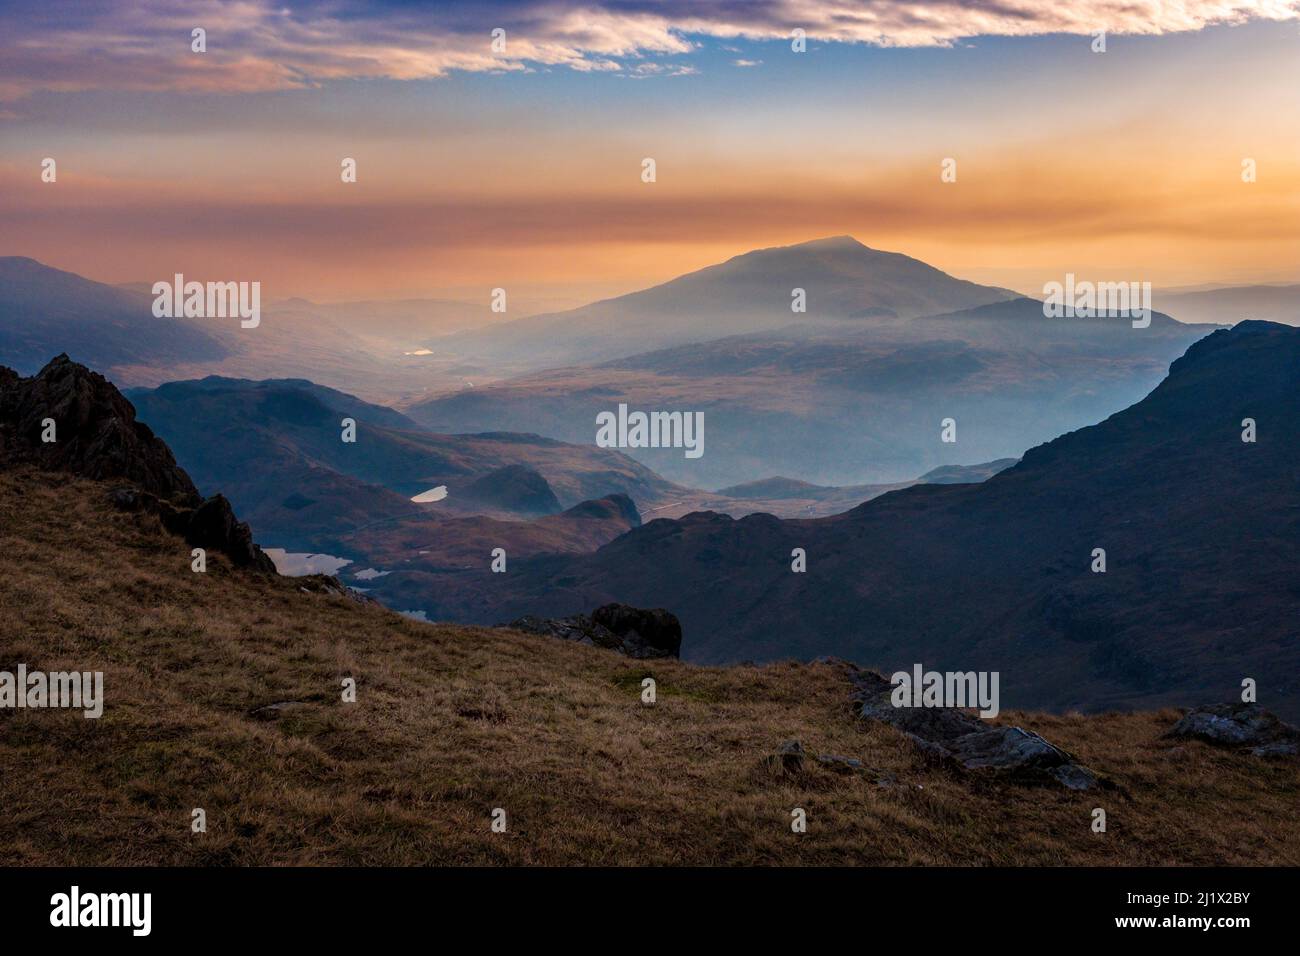 Moel Siabod a mountain in Snowdonia, North Wales at dawn seen from Snowdon Stock Photo